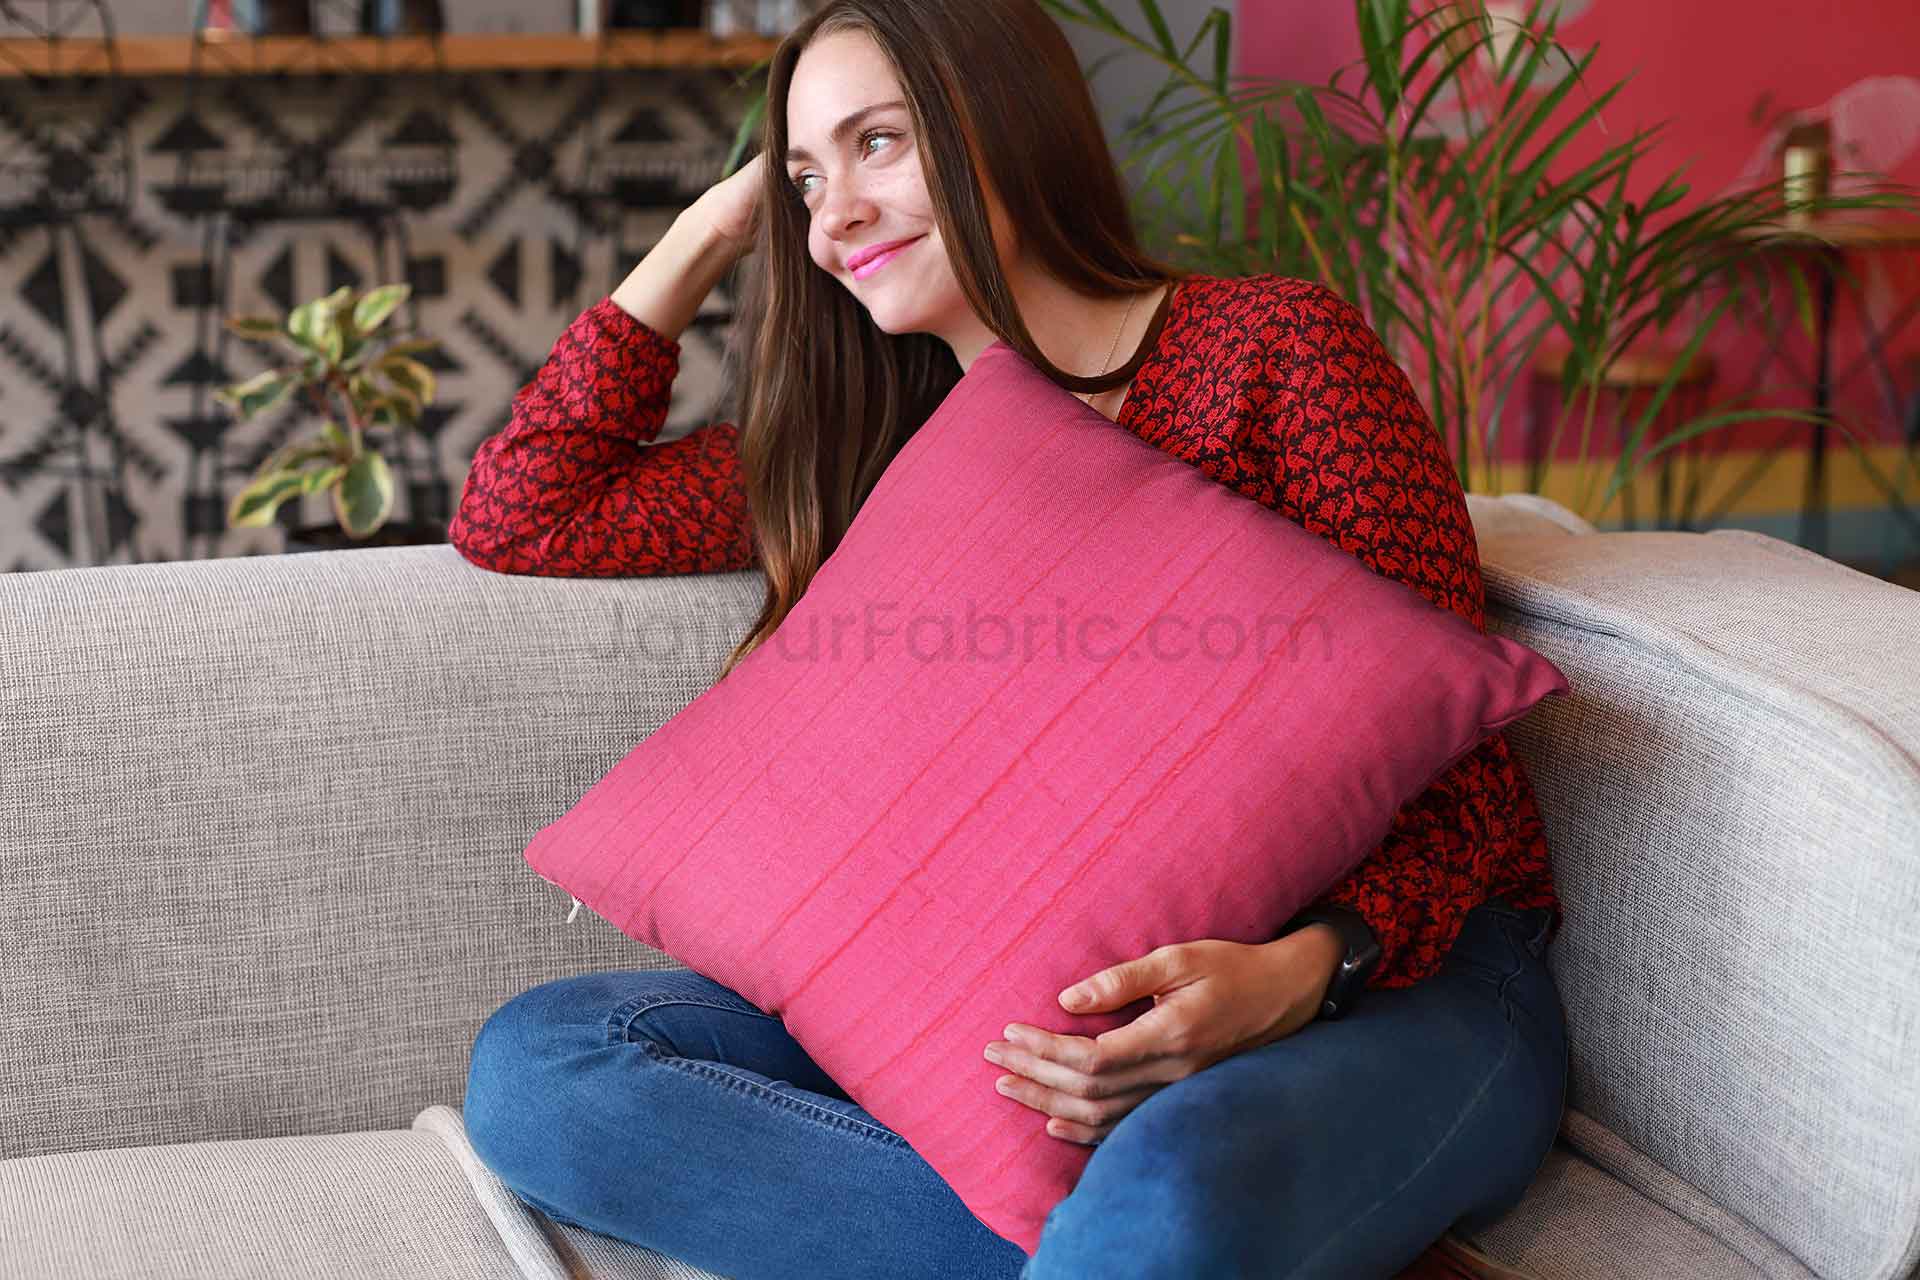 Pink  Quilted Cotton Cushion Cover